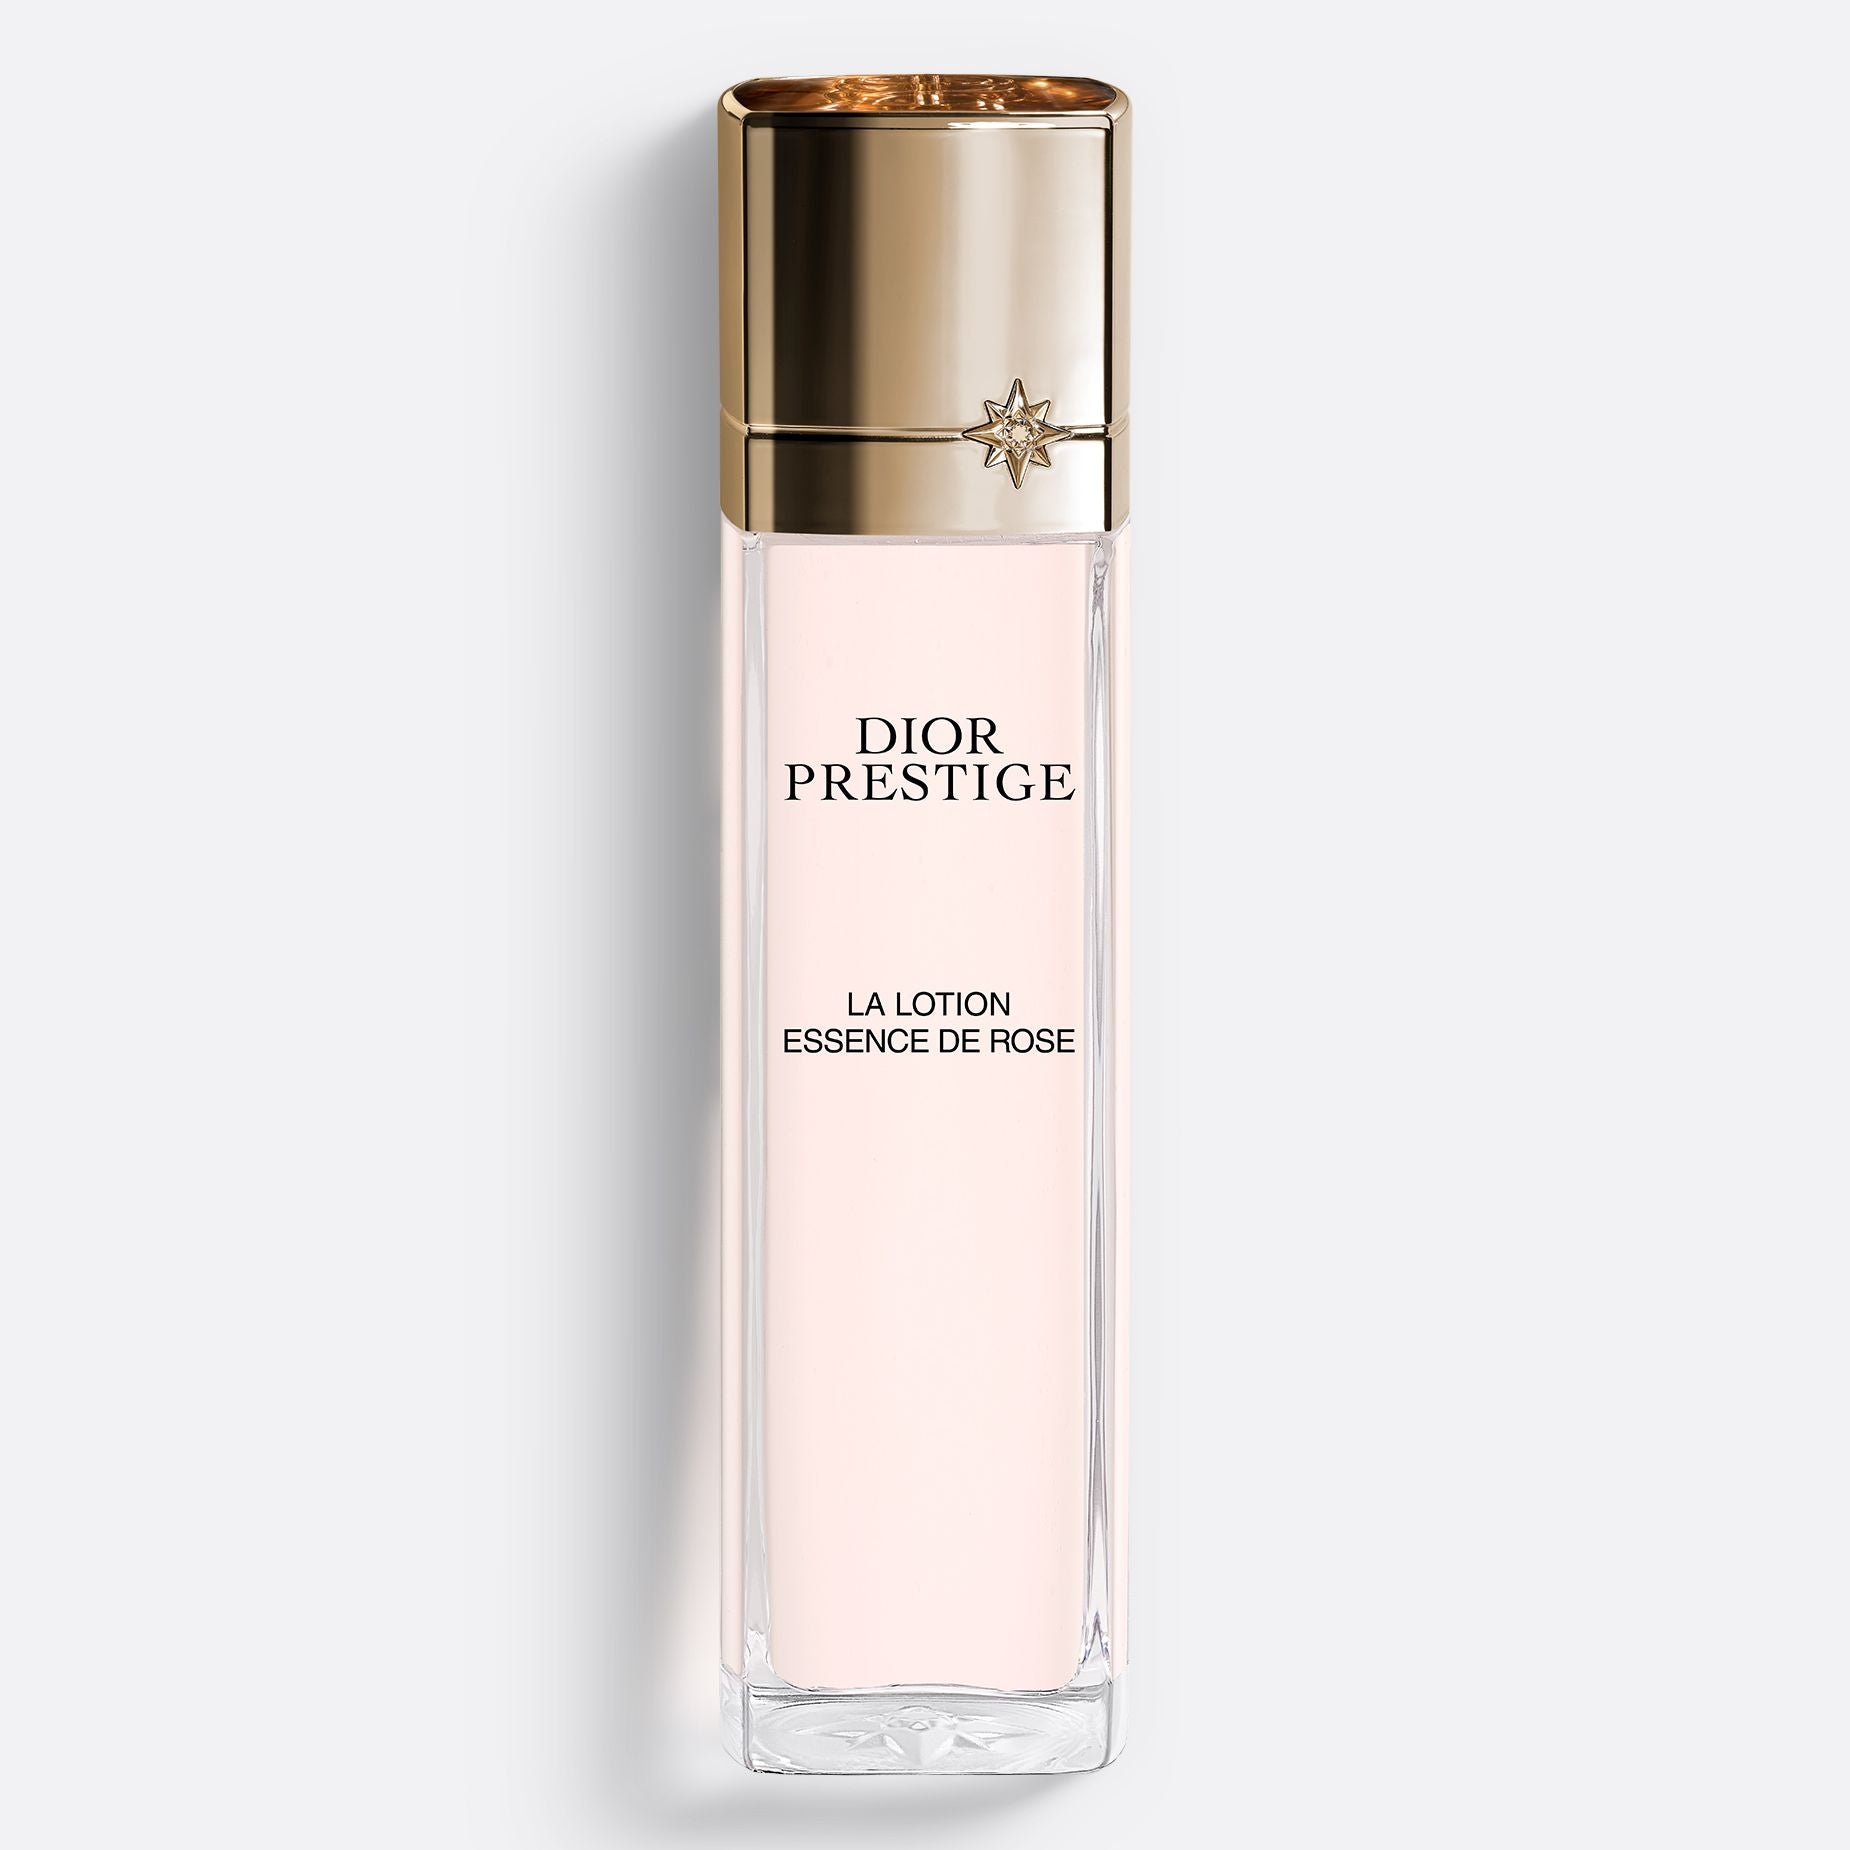 DIOR PRESTIGE LA LOTION ESSENCE DE ROSE ~ Lotion for Face and Neck - Hydrates, Nourishes and Revitalizes the Skin